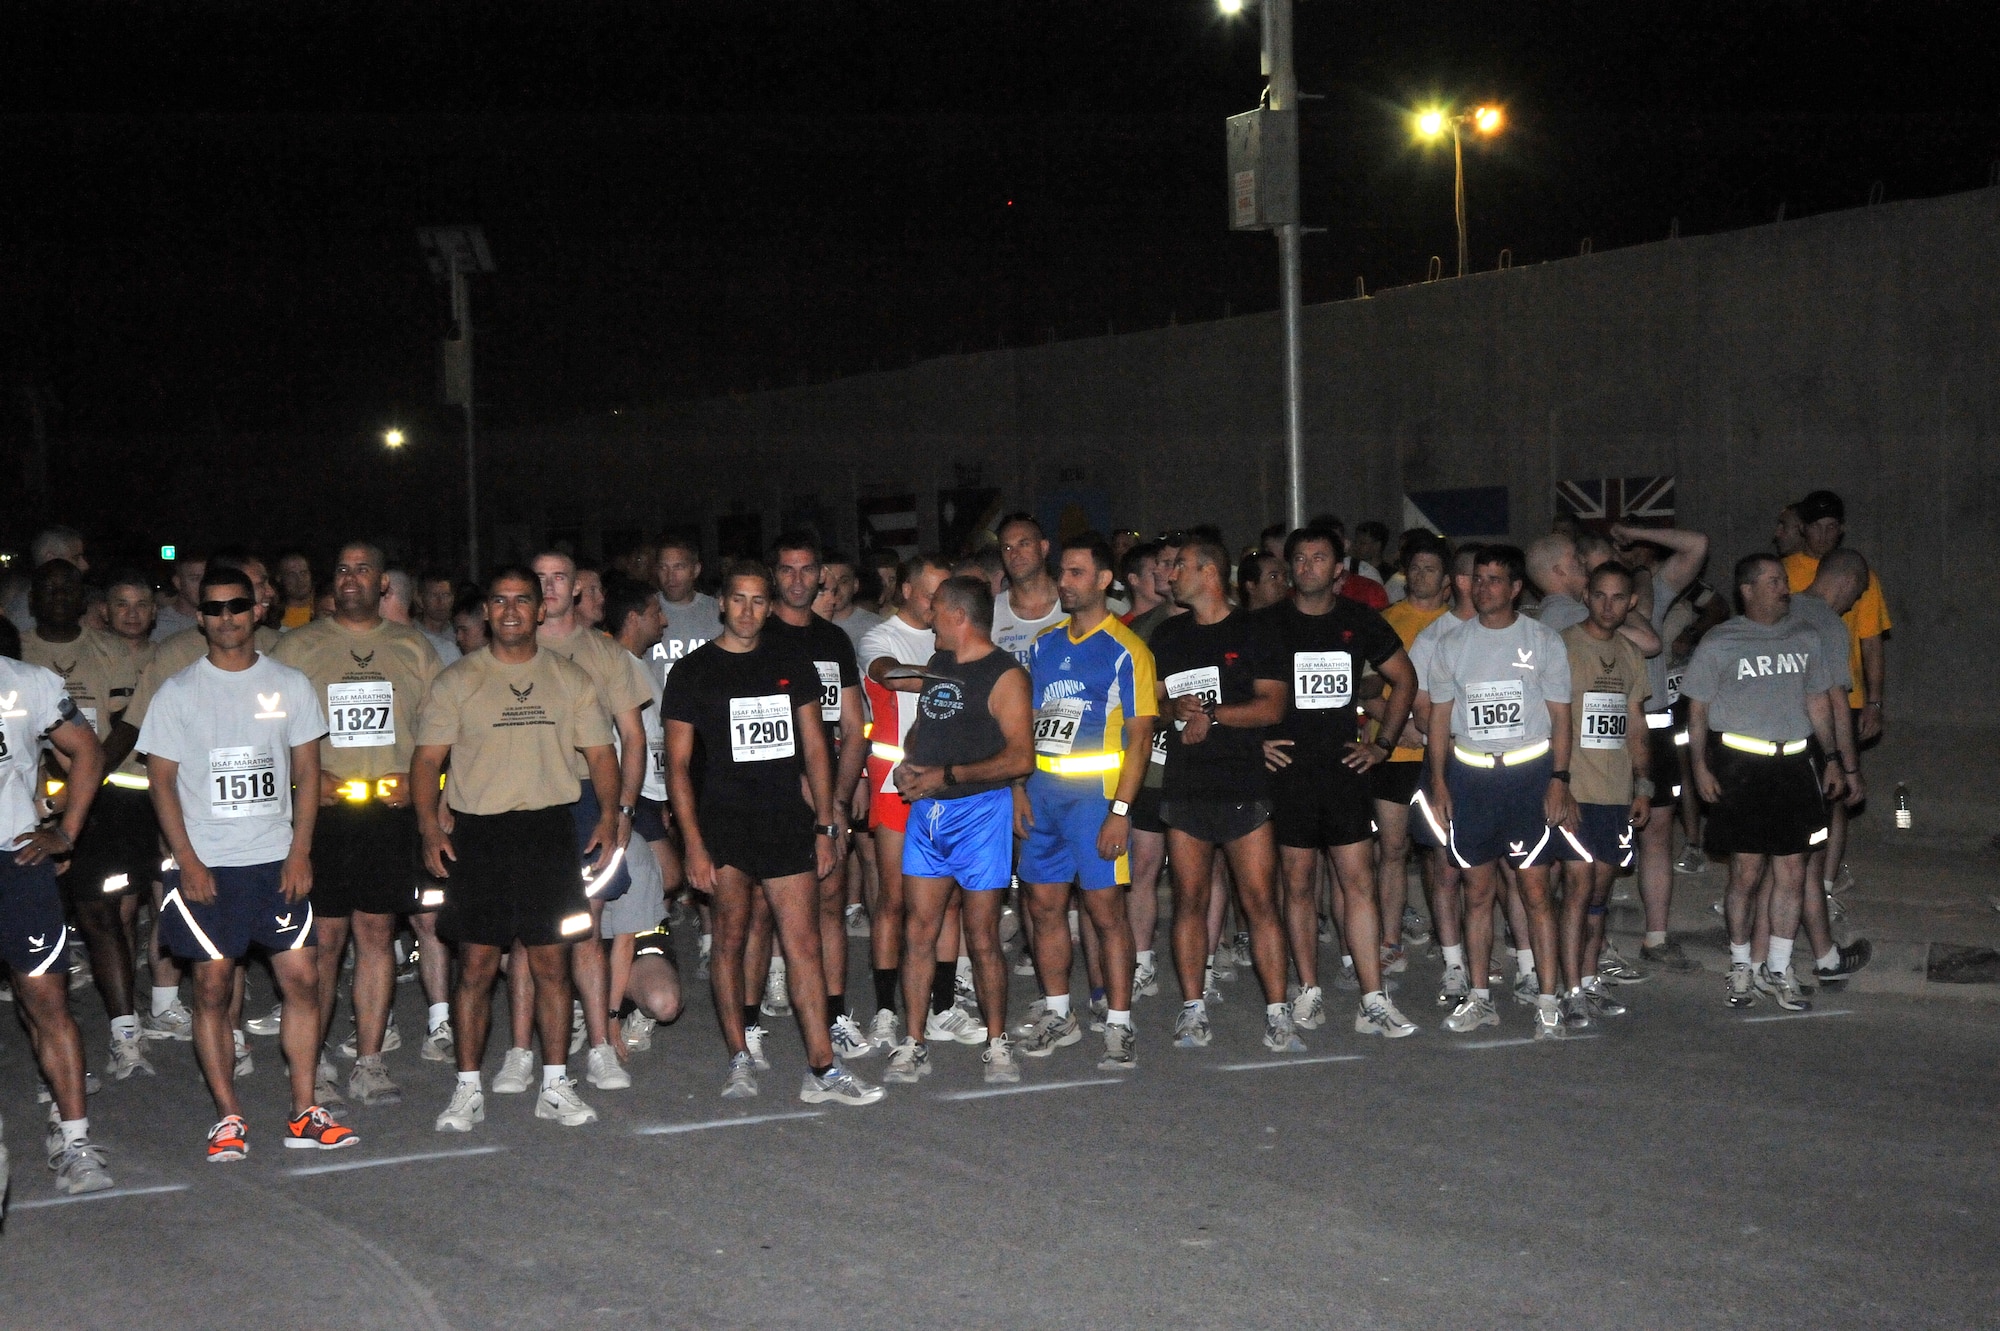 SATHER AIR BASE, Iraq -- More than 300 participants get ready at the starting line Sept. 5 for Sather Air Base's Air Force Marathon.  (U.S. Air Force photo/Staff Sgt. Misty D. Slater) 